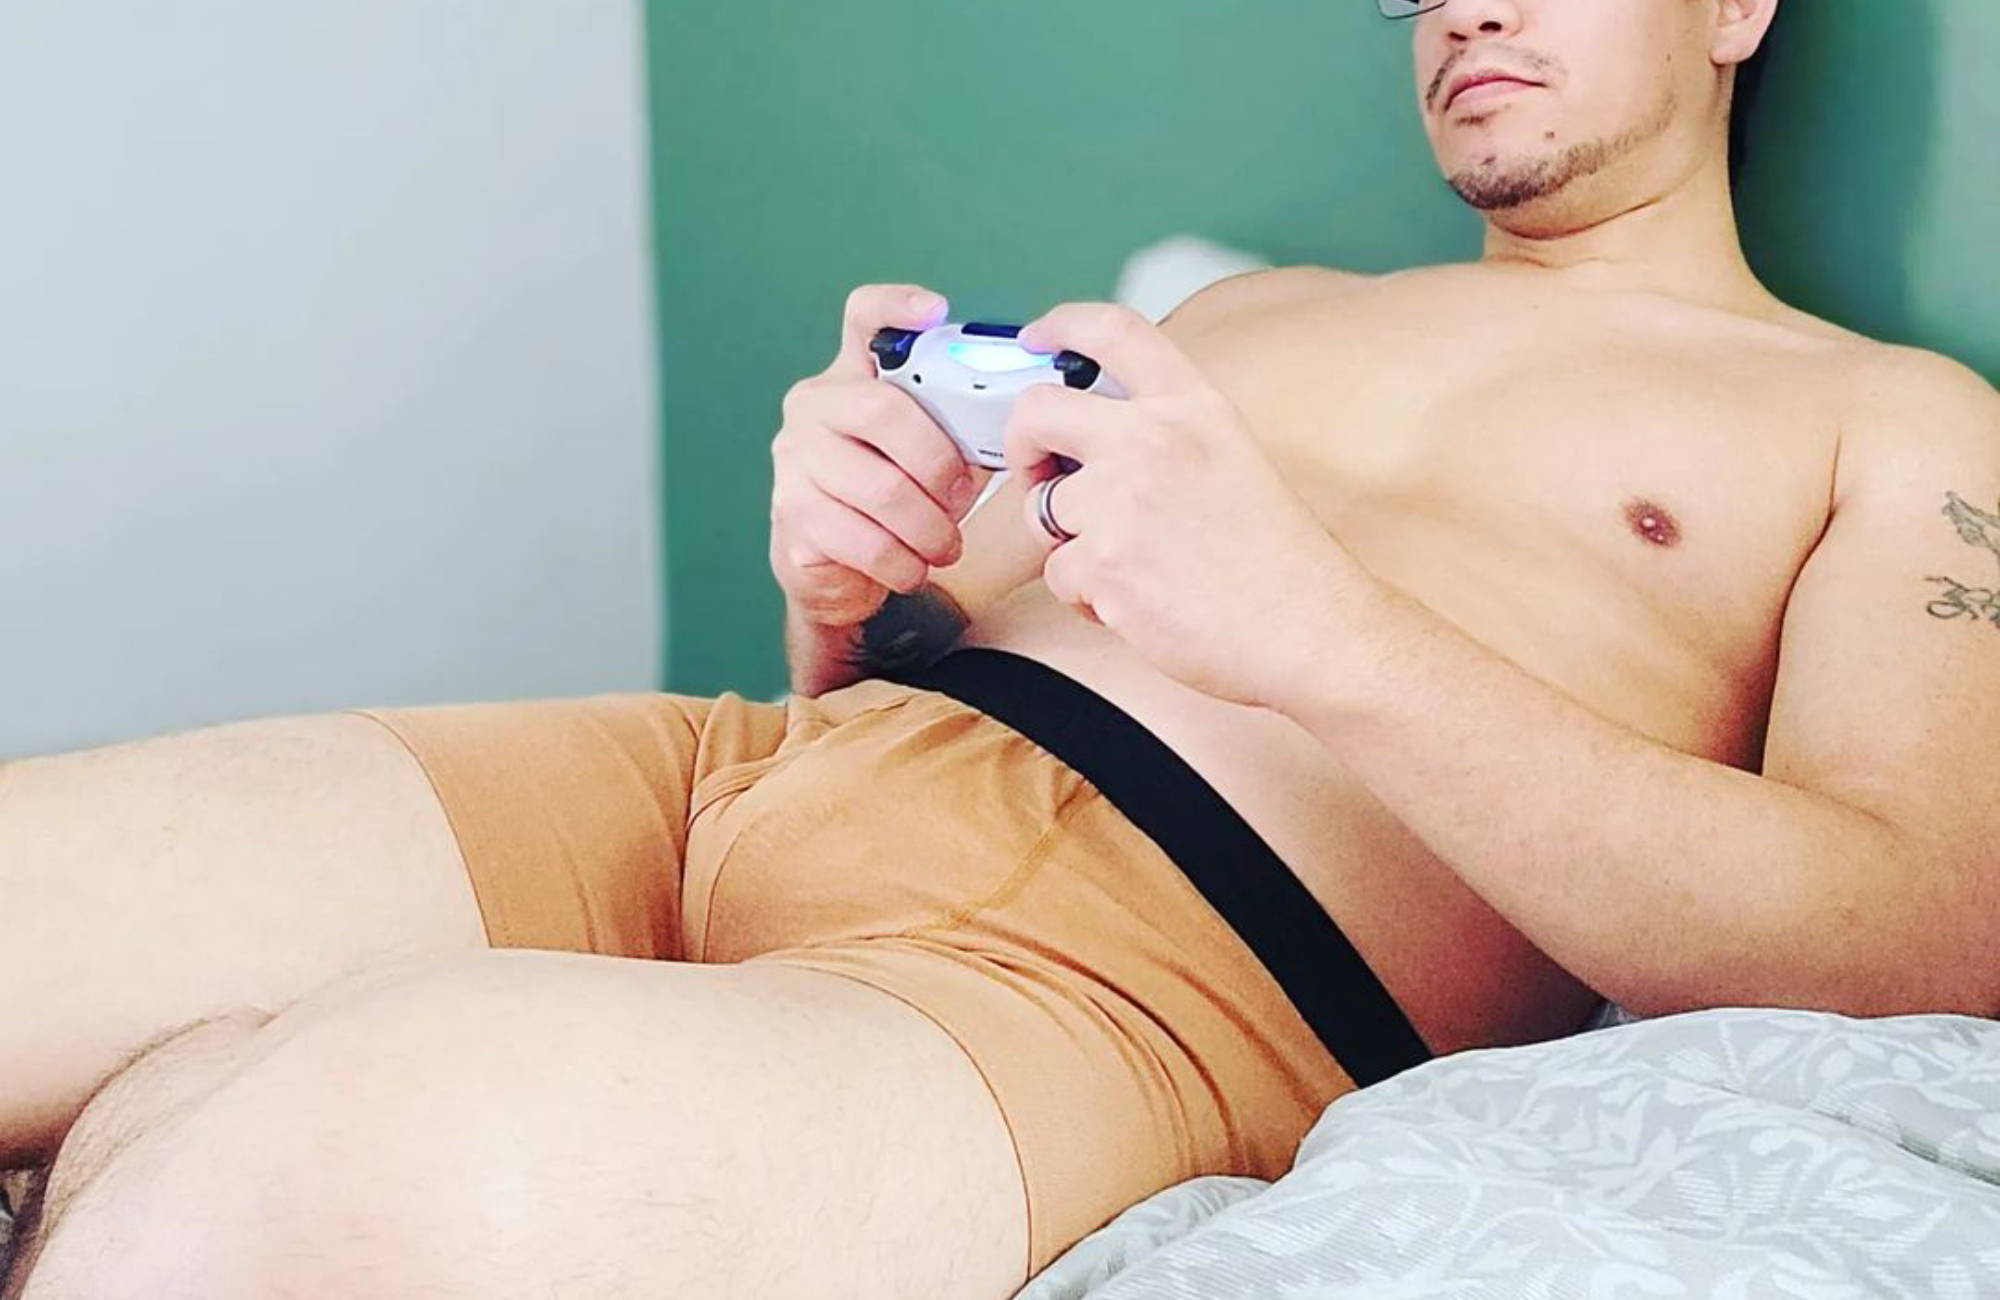 man in glasses wearing only nude boxer briefs playing a video game